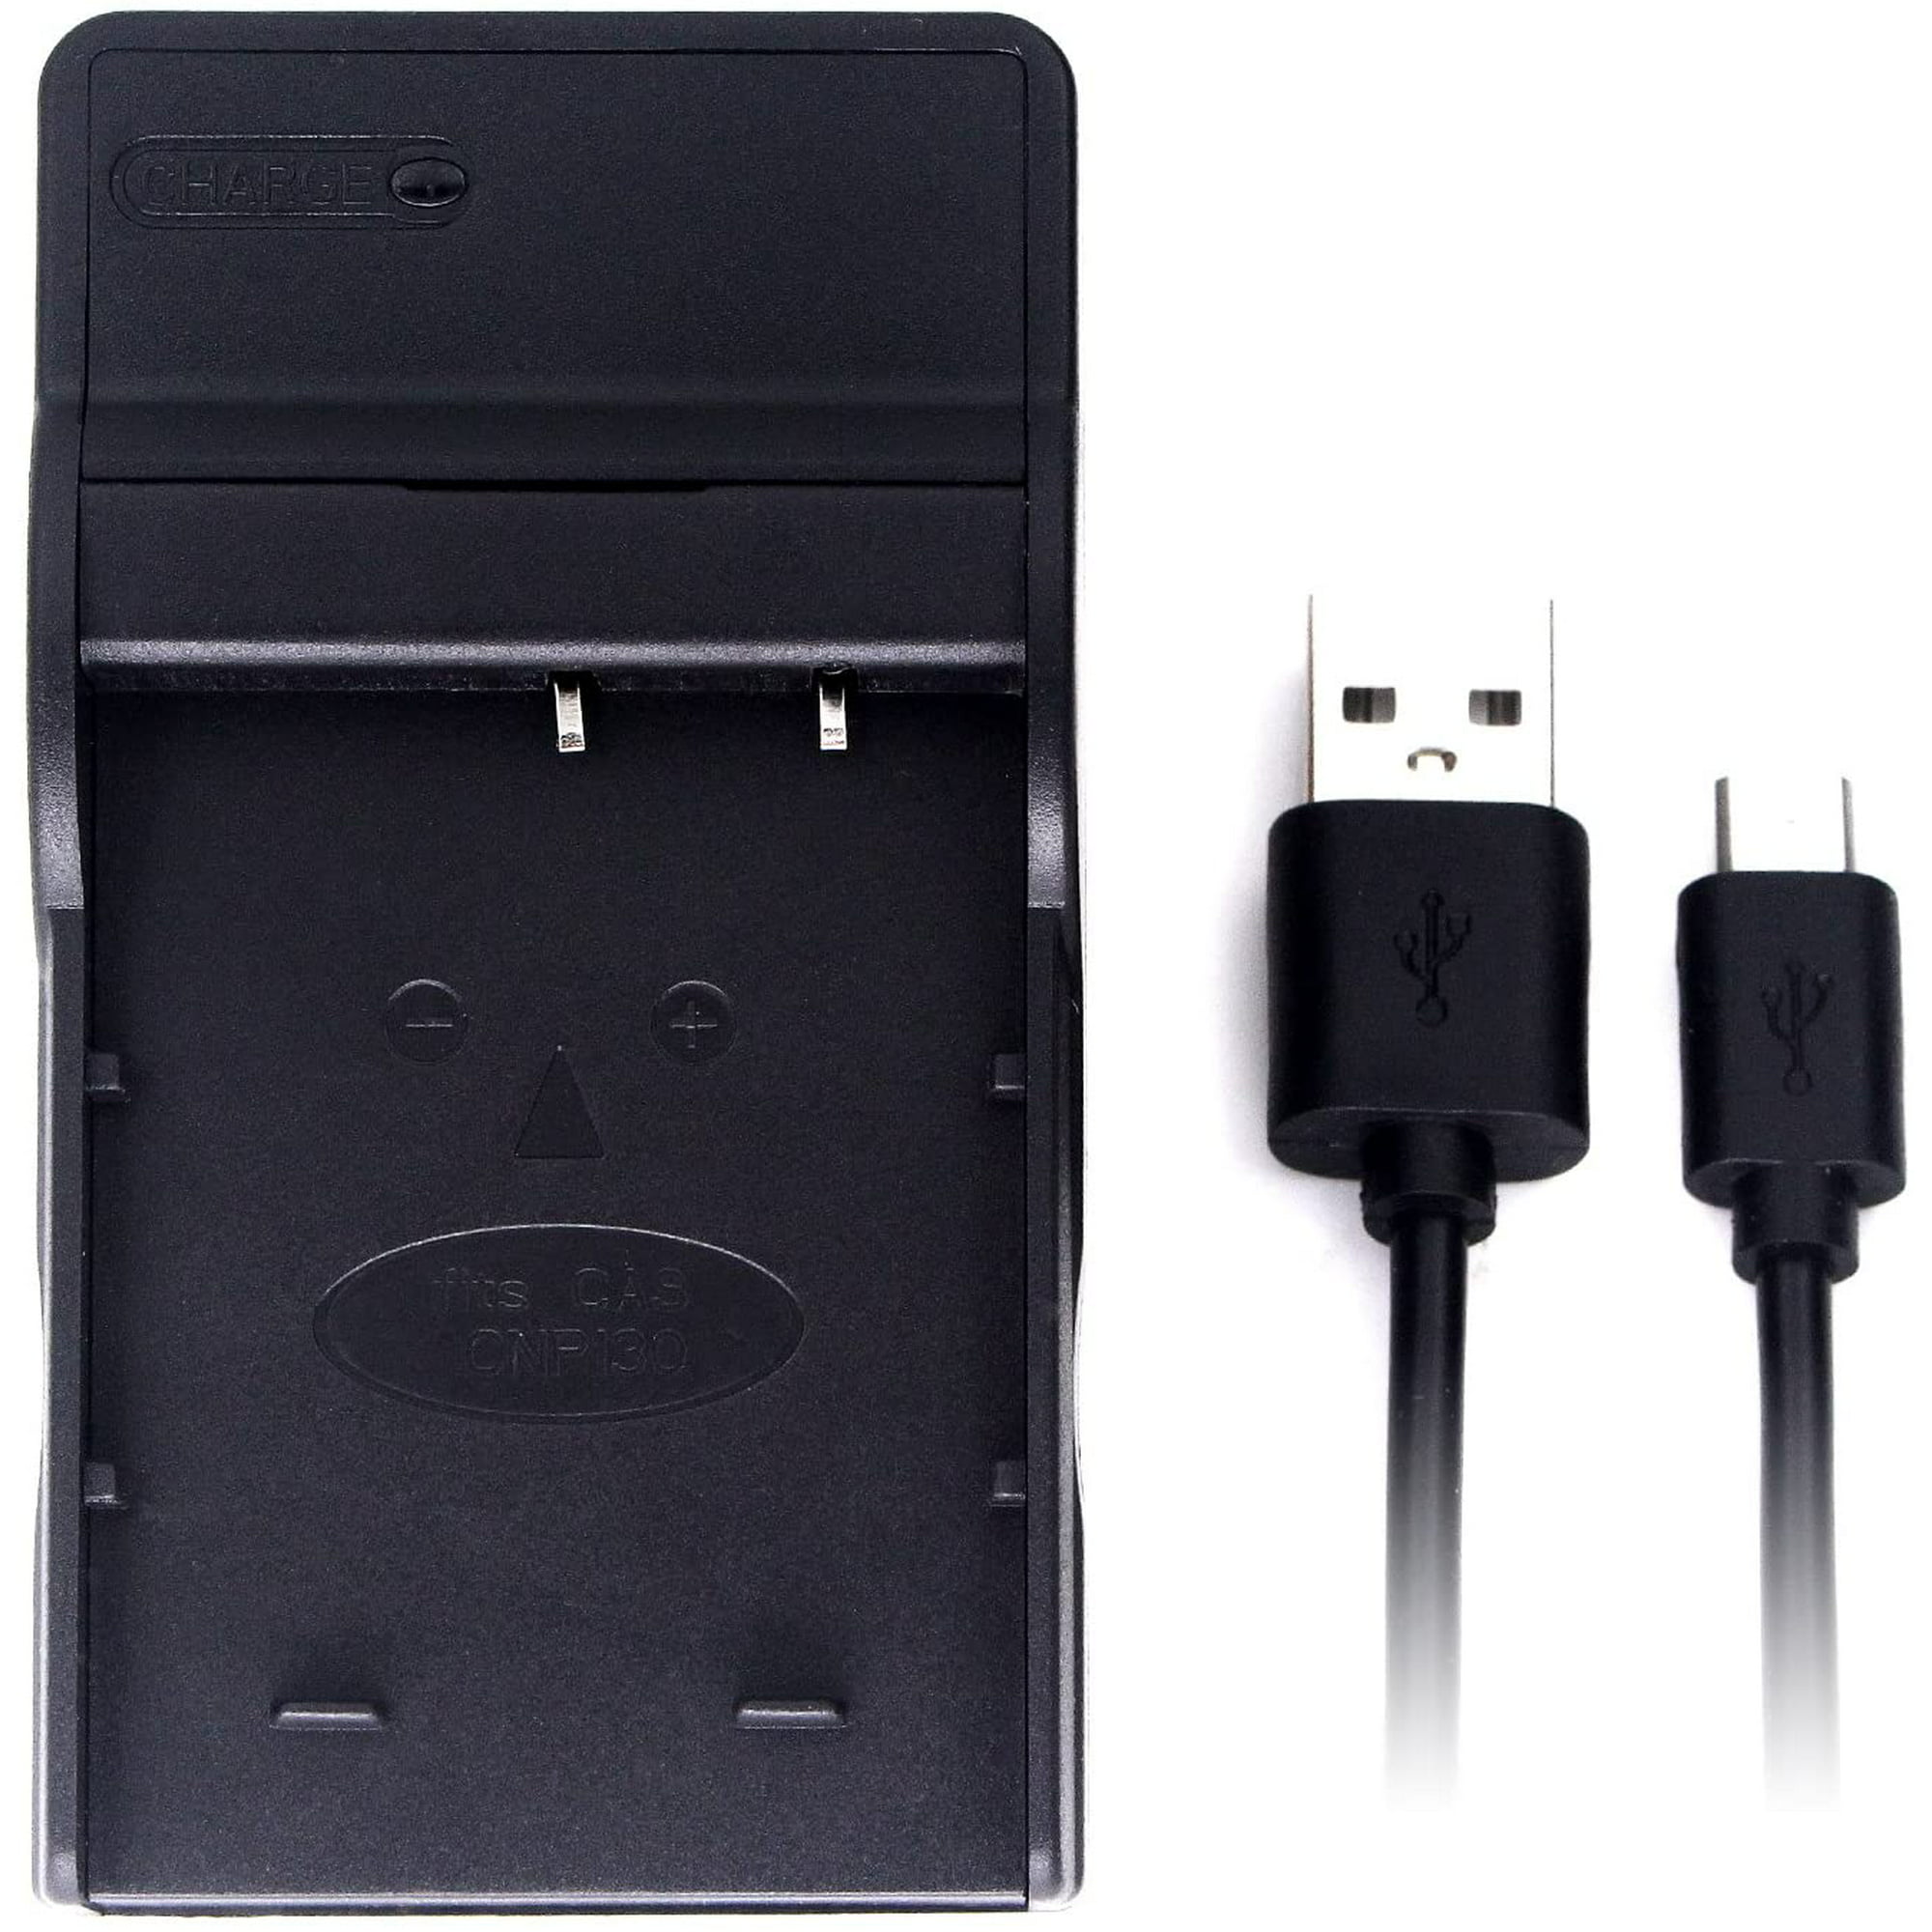 Np 130 Usb Charger For Casio Exilim Ex 10 Ex H30 Ex H35 Ex Zr100 Ex Zr1000 Ex Zr1100 Ex Zr10 Ex Zr0 Walmart Canada